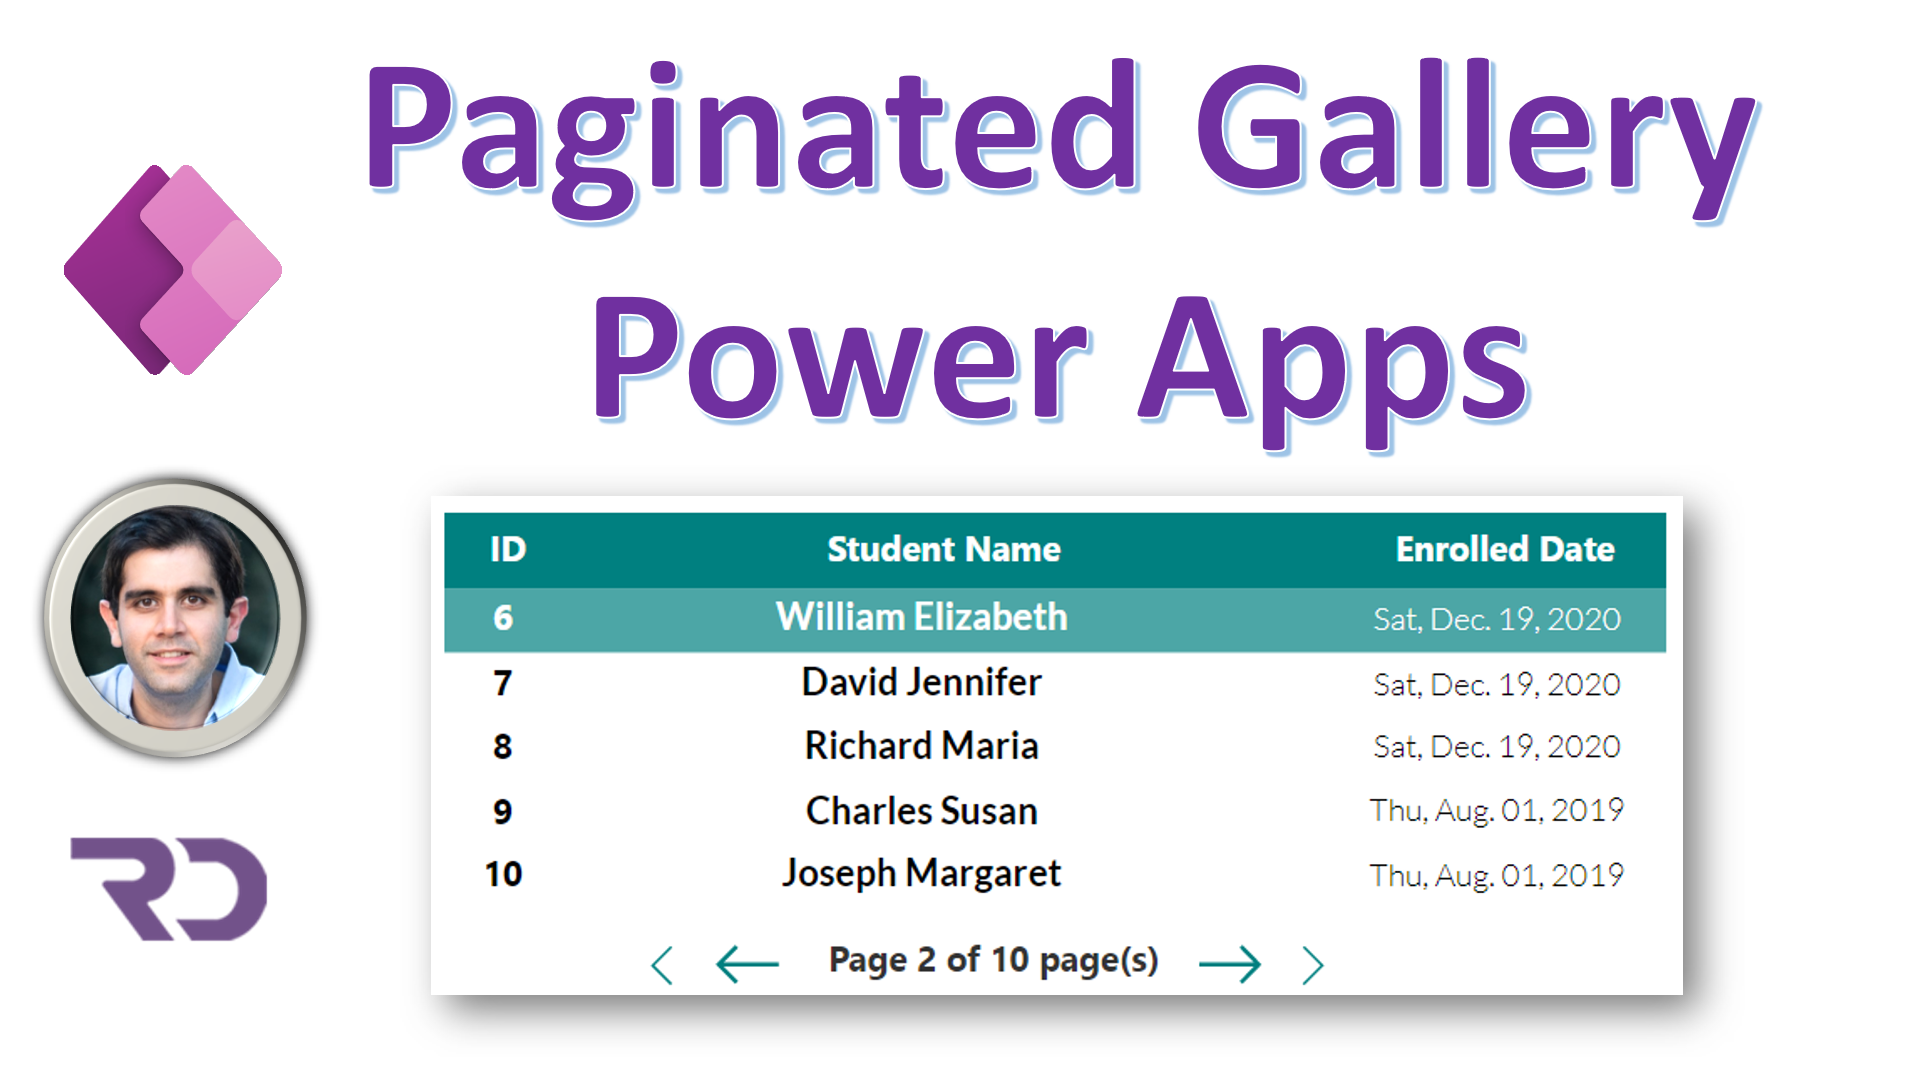 Power Apps Paginated Gallery